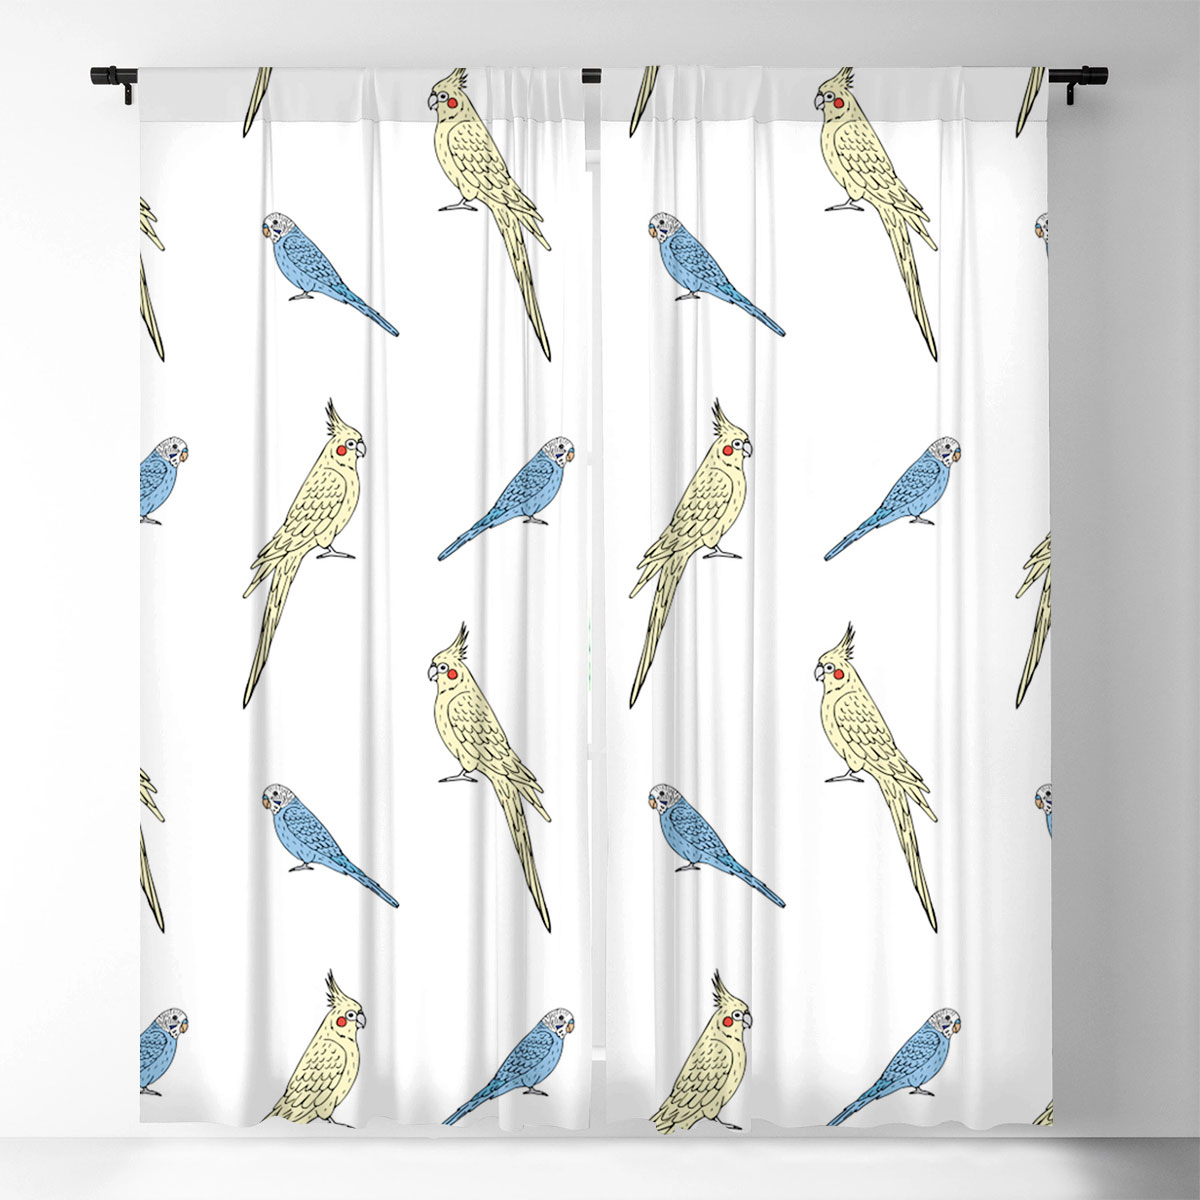 Budgie And Cockatiel Window Curtain